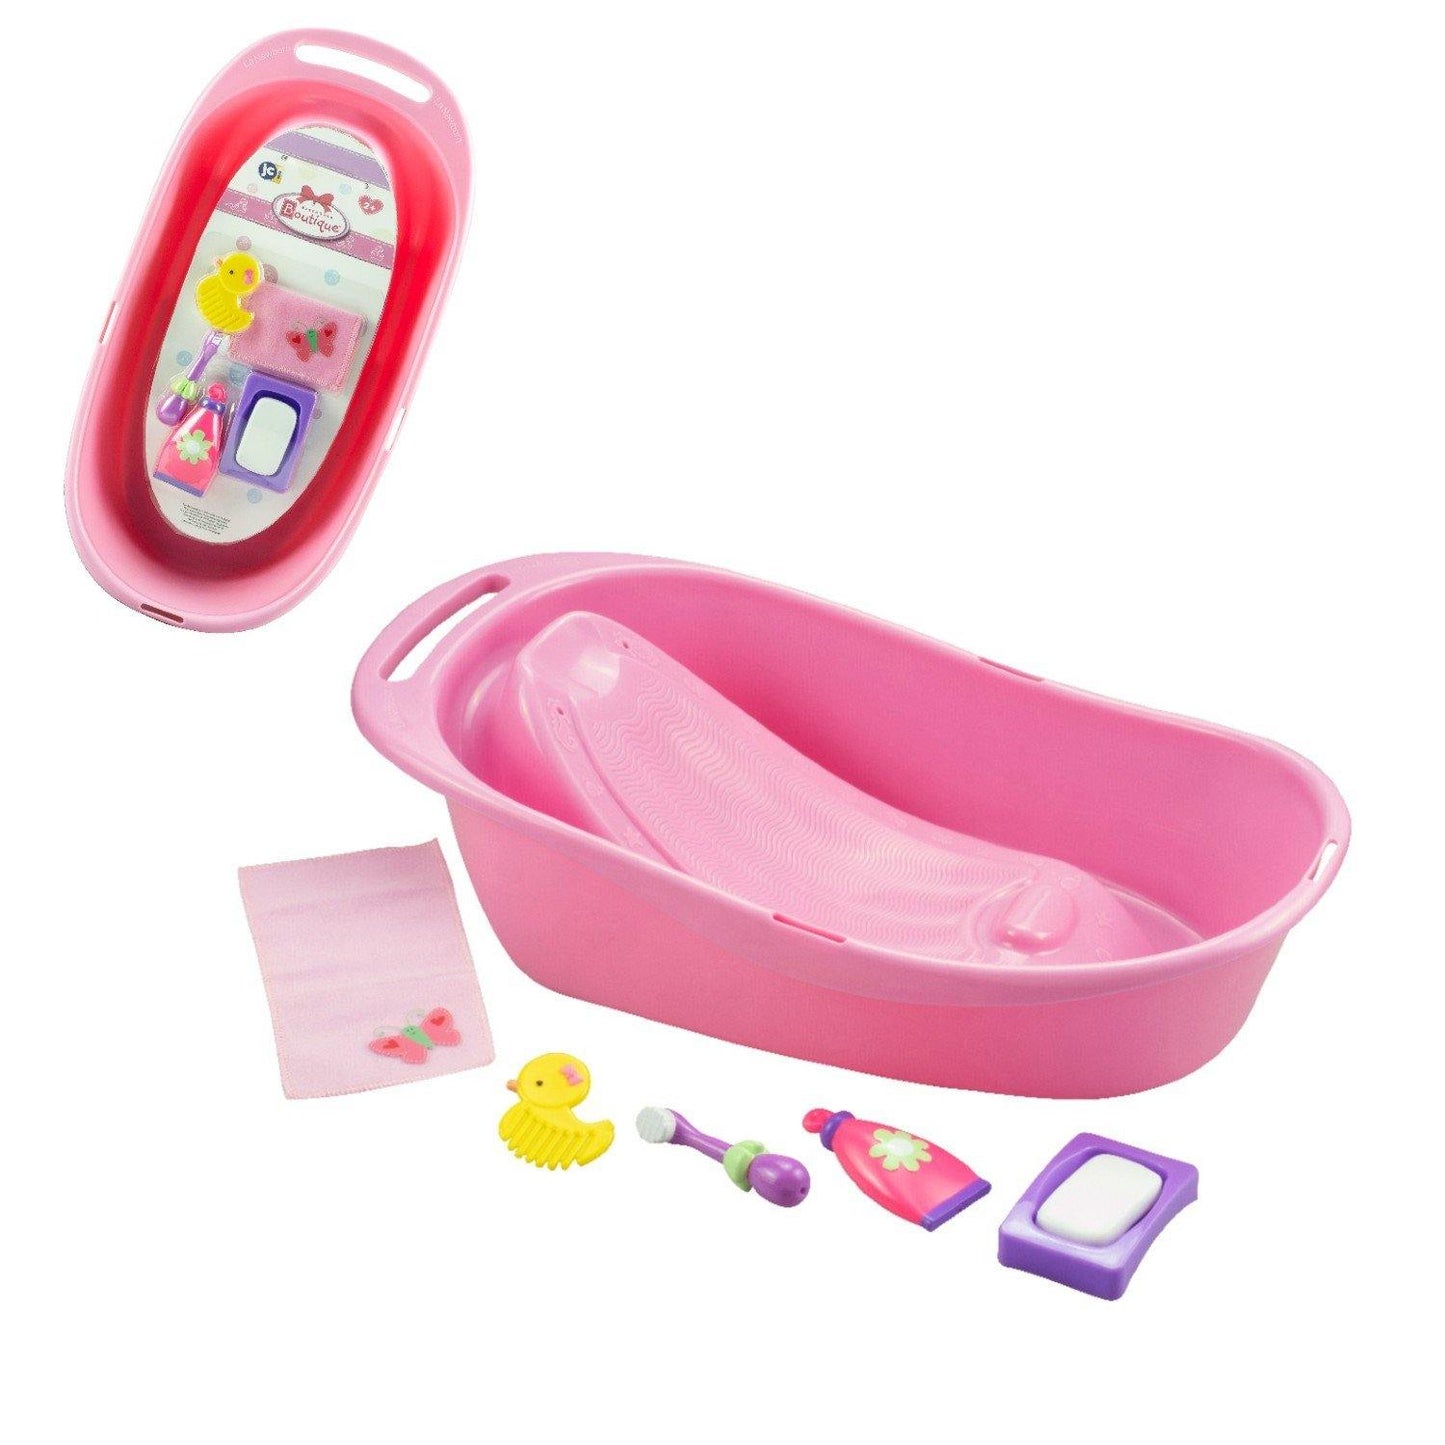 For Keeps! Pink Baby Doll Bath Gift Set Fits Most Dolls up to 16” - Ages 2+ - JC Toys Group Inc.